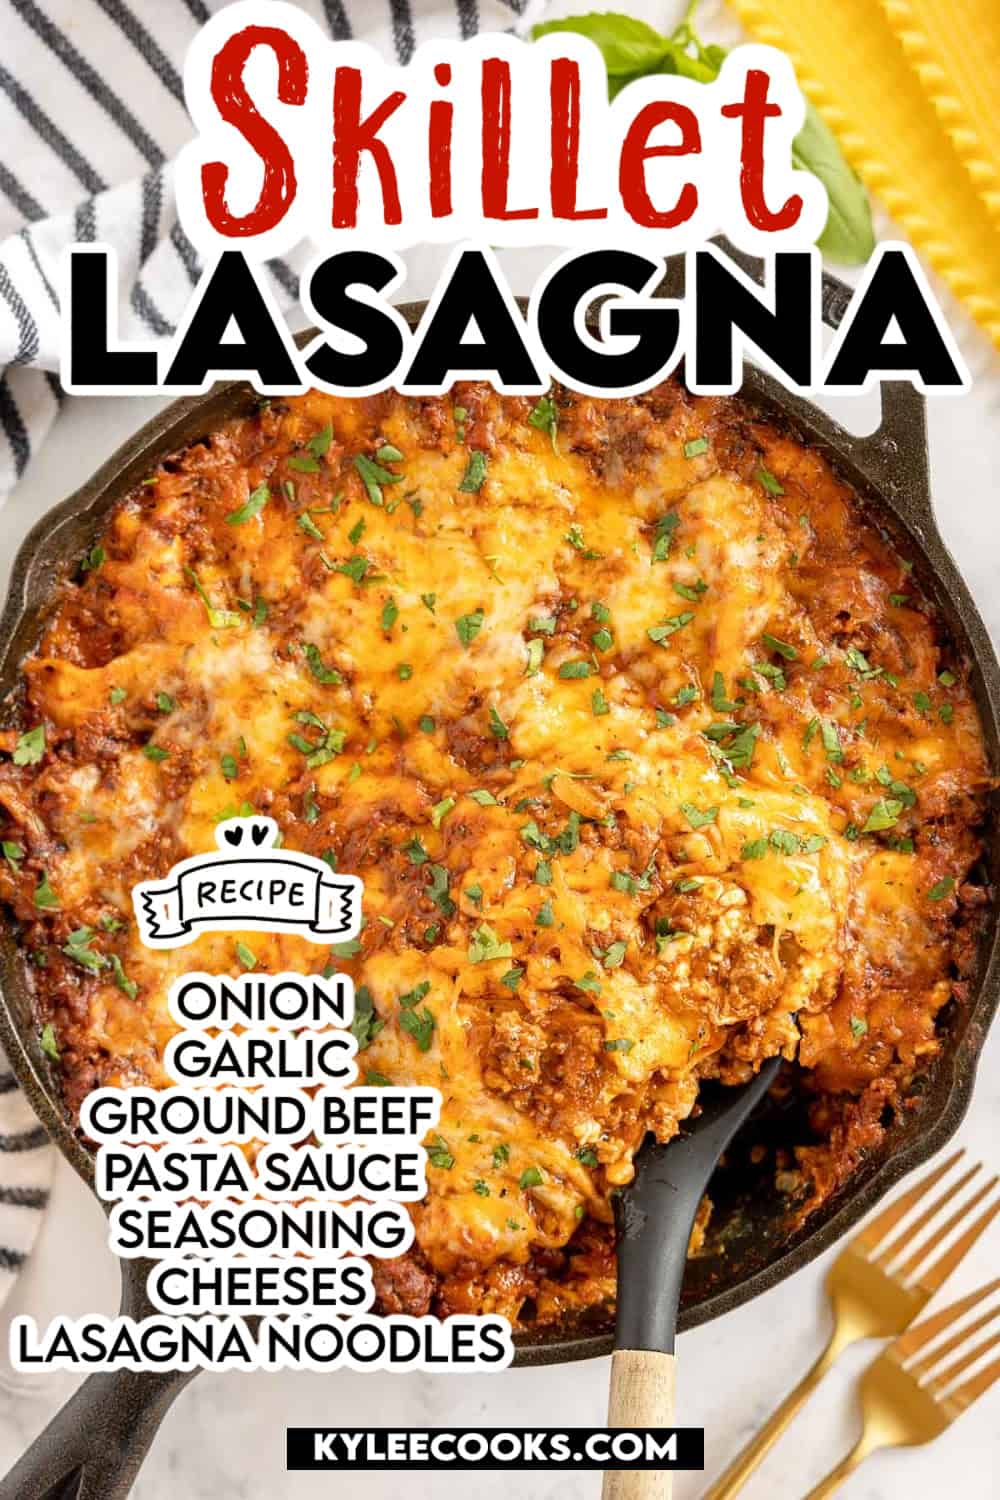 A skillet of lasagna and recipe name "skillet lasagna" overlaid in text.